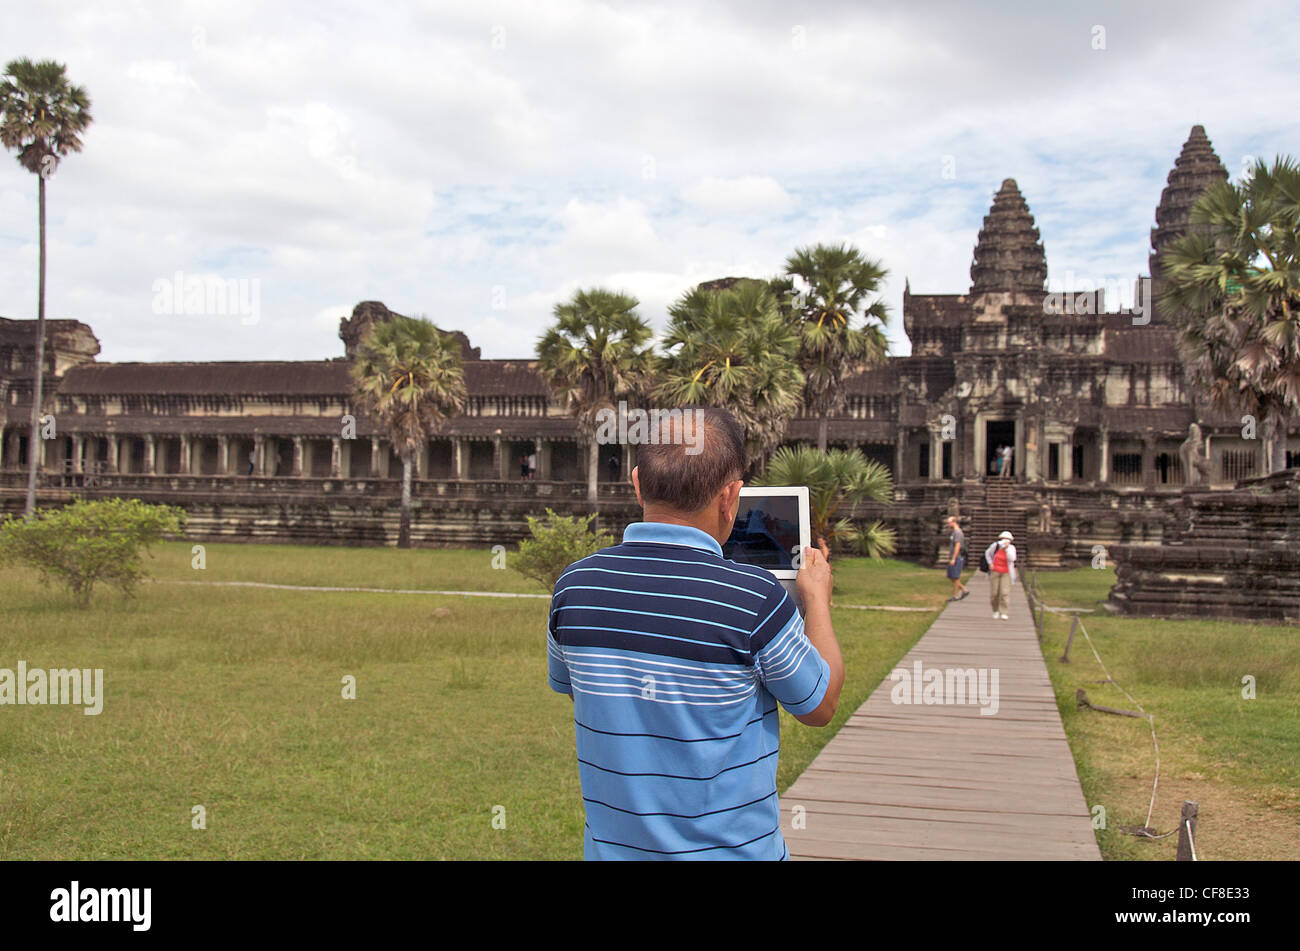 Tourist photographing temple Angkor Vat Cambodge Banque D'Images